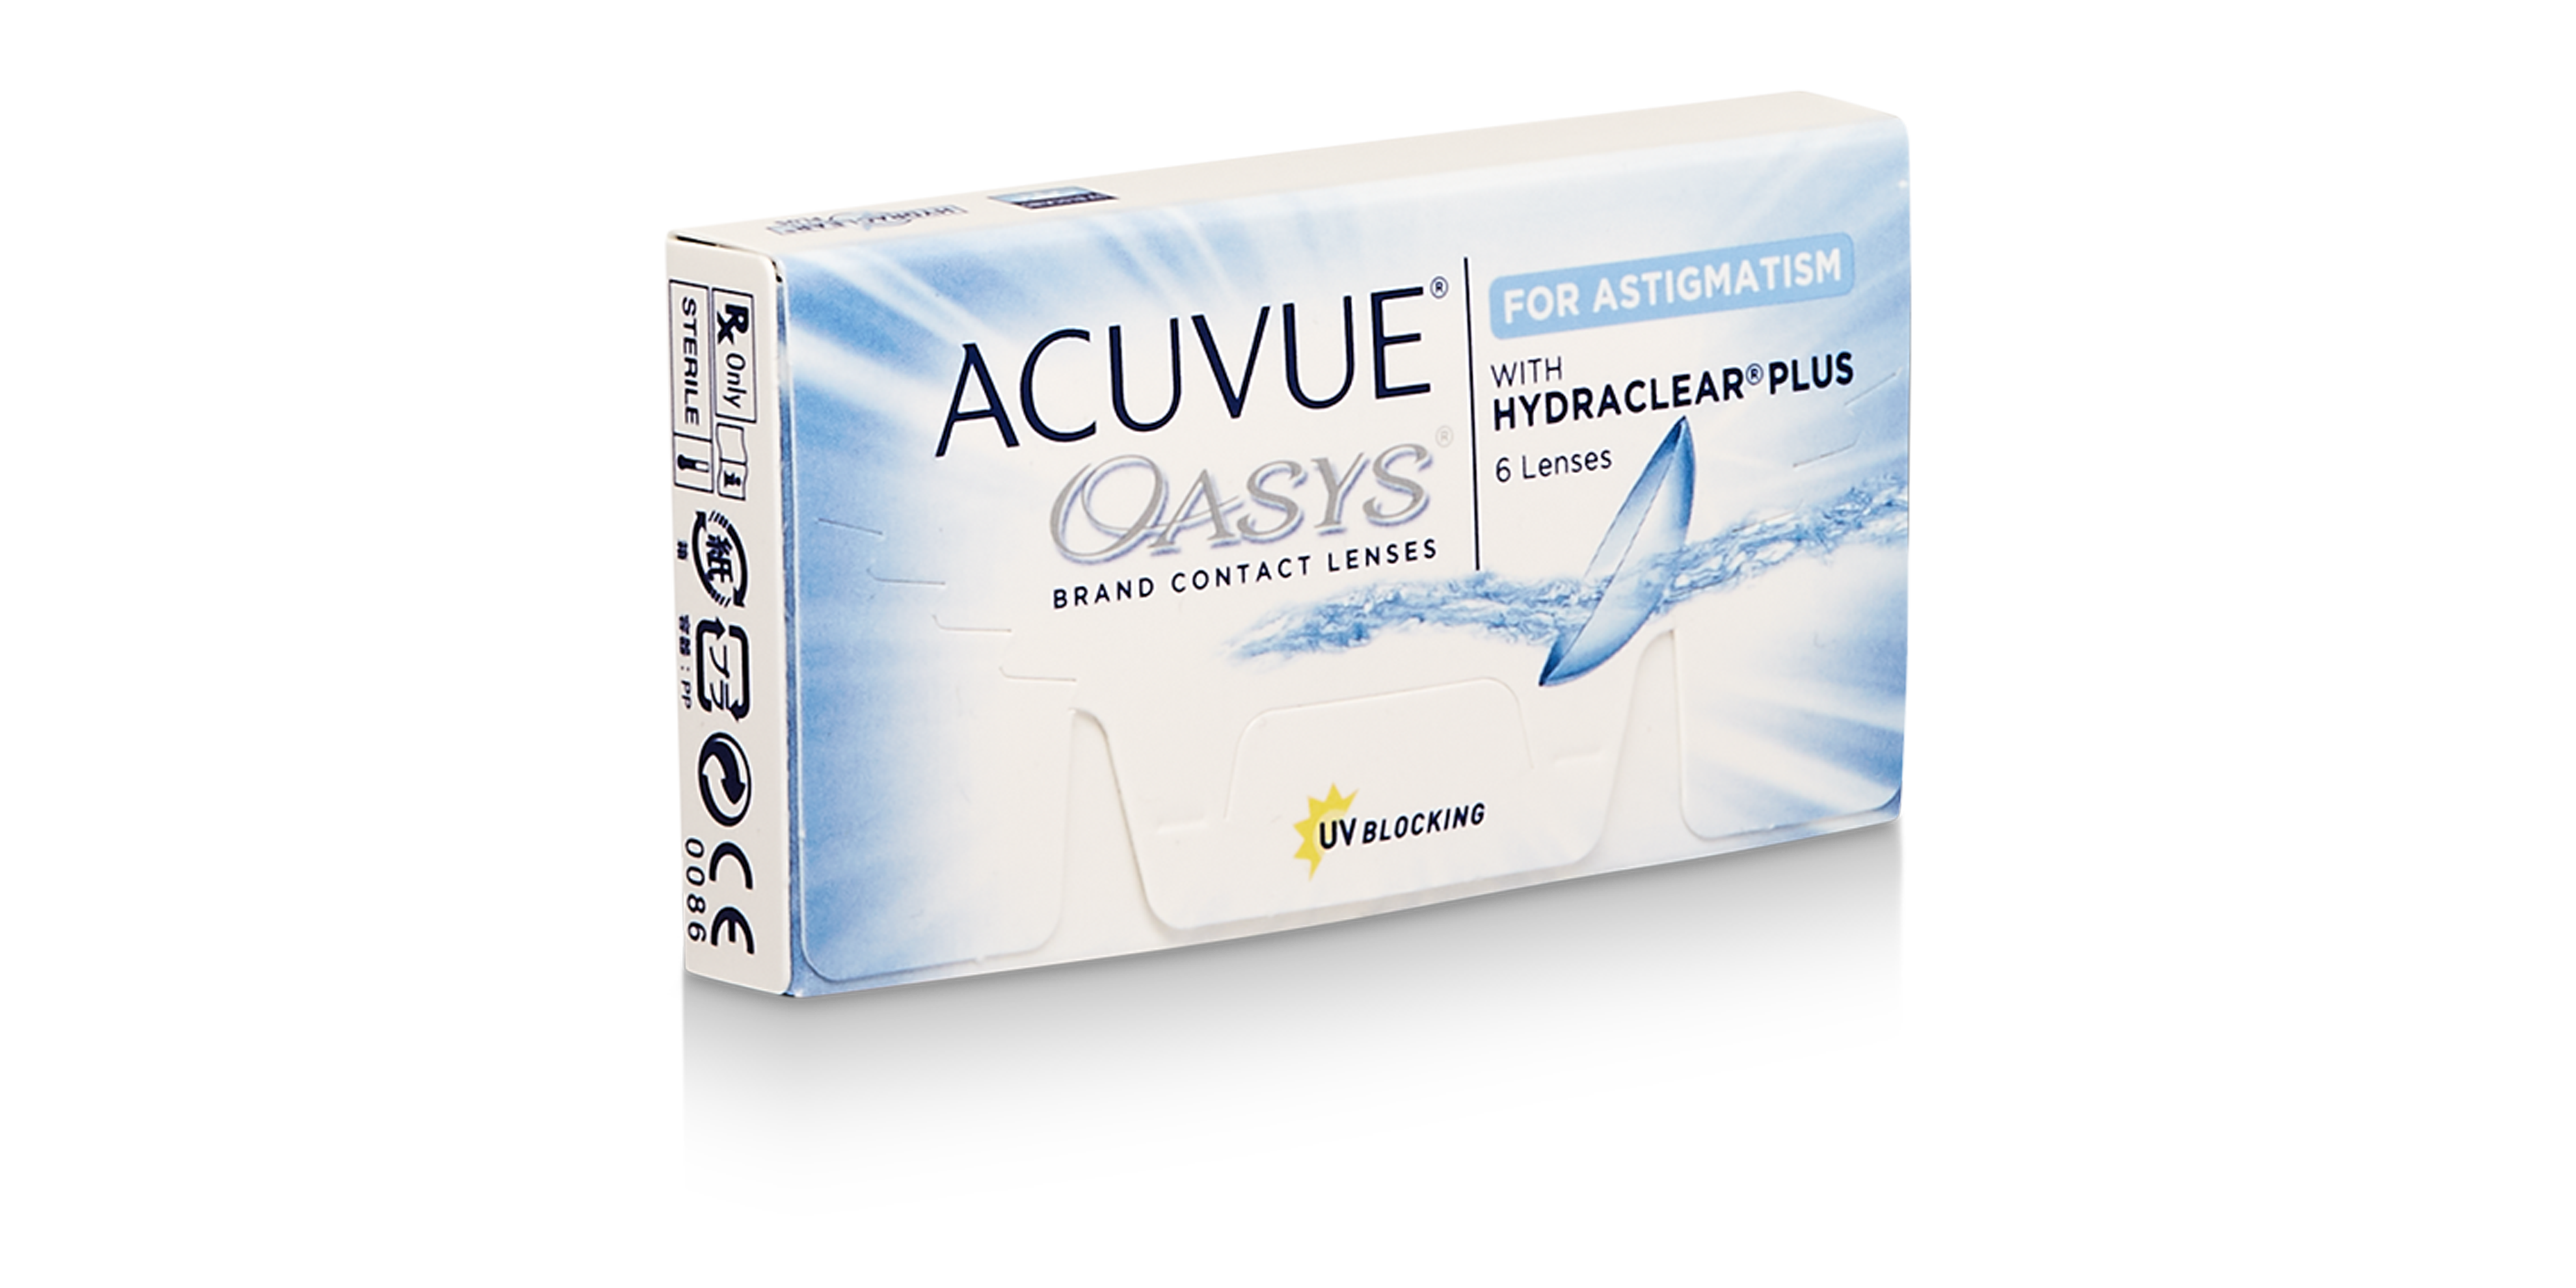 Acuvue Oasys® for Astigmatism, 6 pack contact lenses